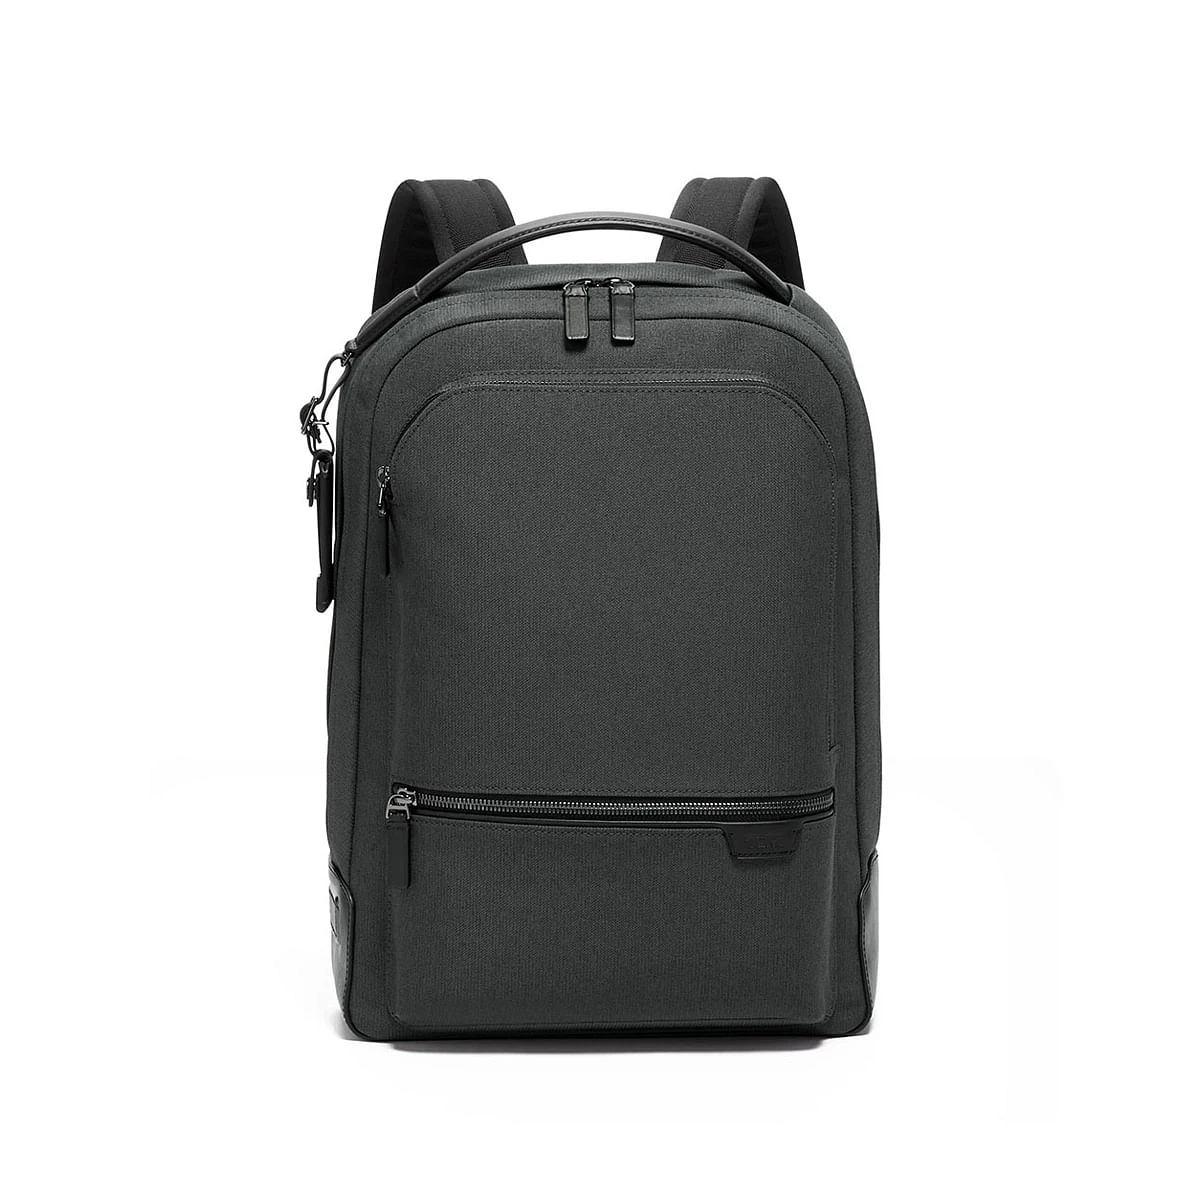 BÉIS 'The Backpack' in Gray - Gray Laptop Backpack For Work & Travel